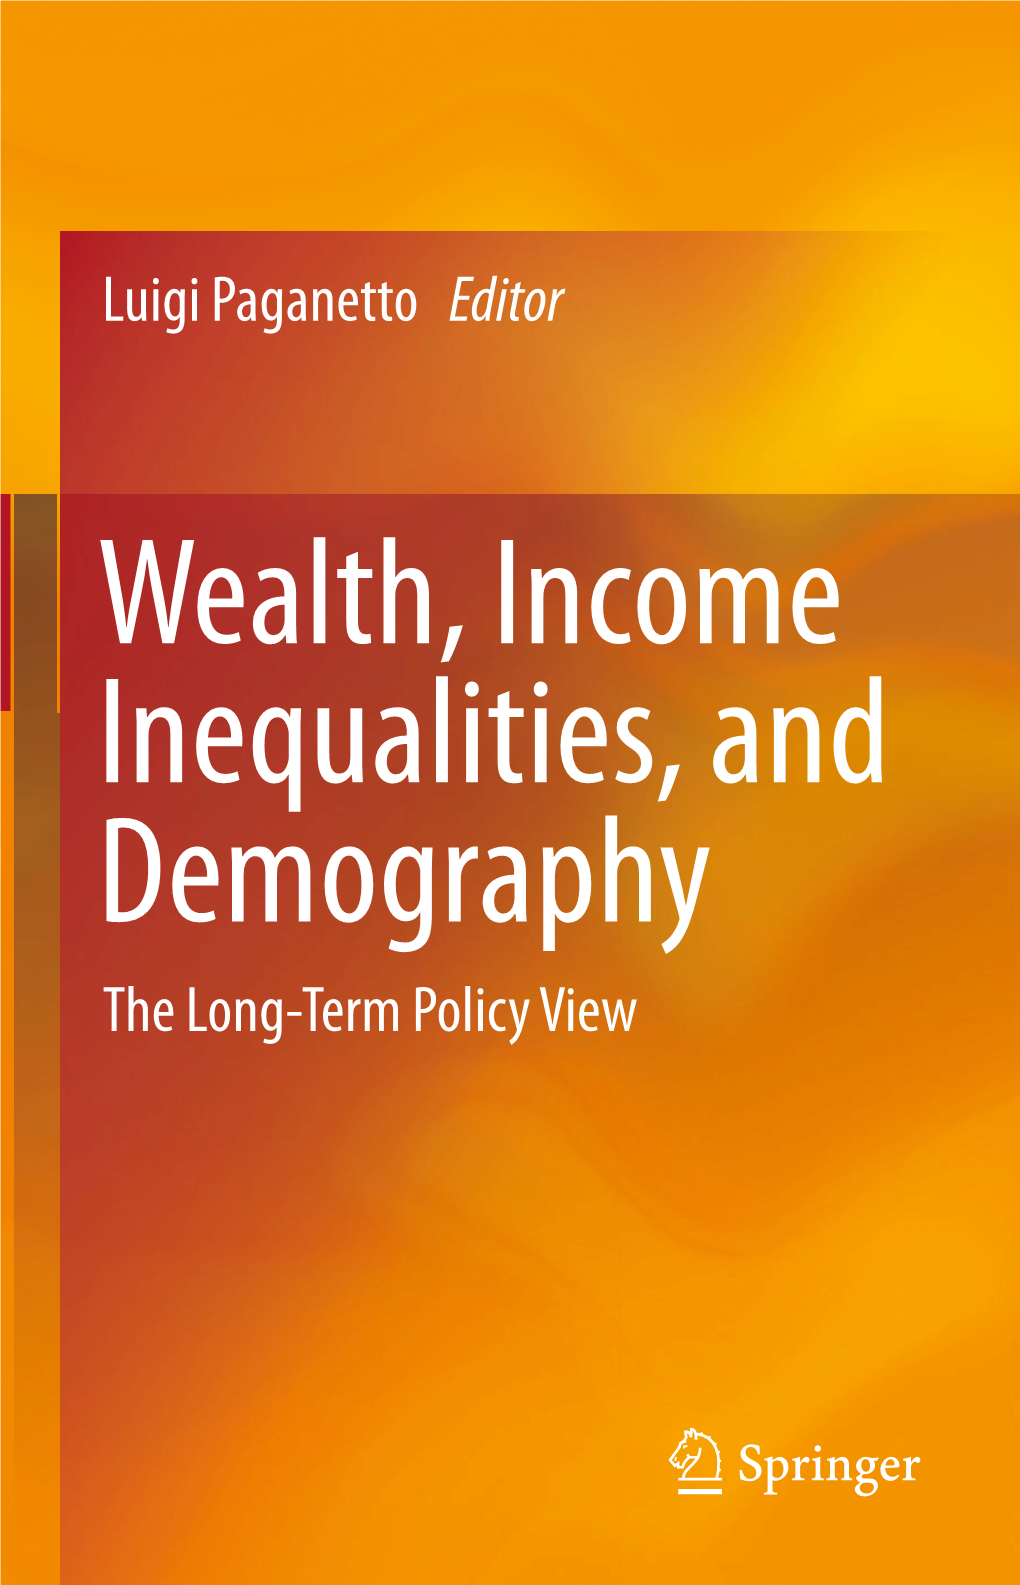 Wealth, Income Inequalities, and Demography the Long-Term Policy View Wealth, Income Inequalities, and Demography